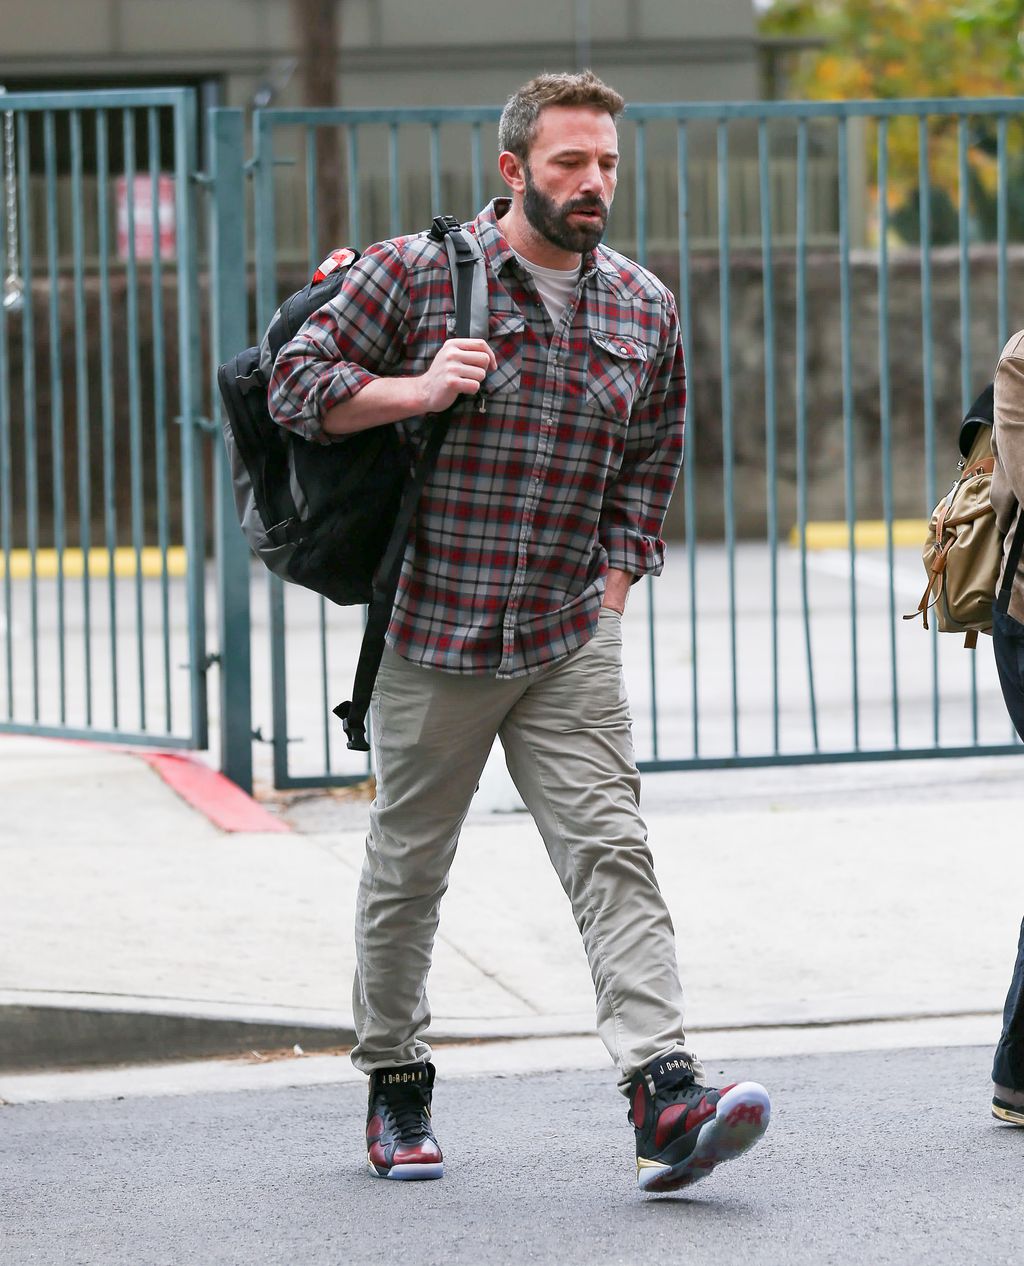 Ben Affleck wearing a normcore staple, some baggy trousers, a plaid shirt, sneakers, and a backpack